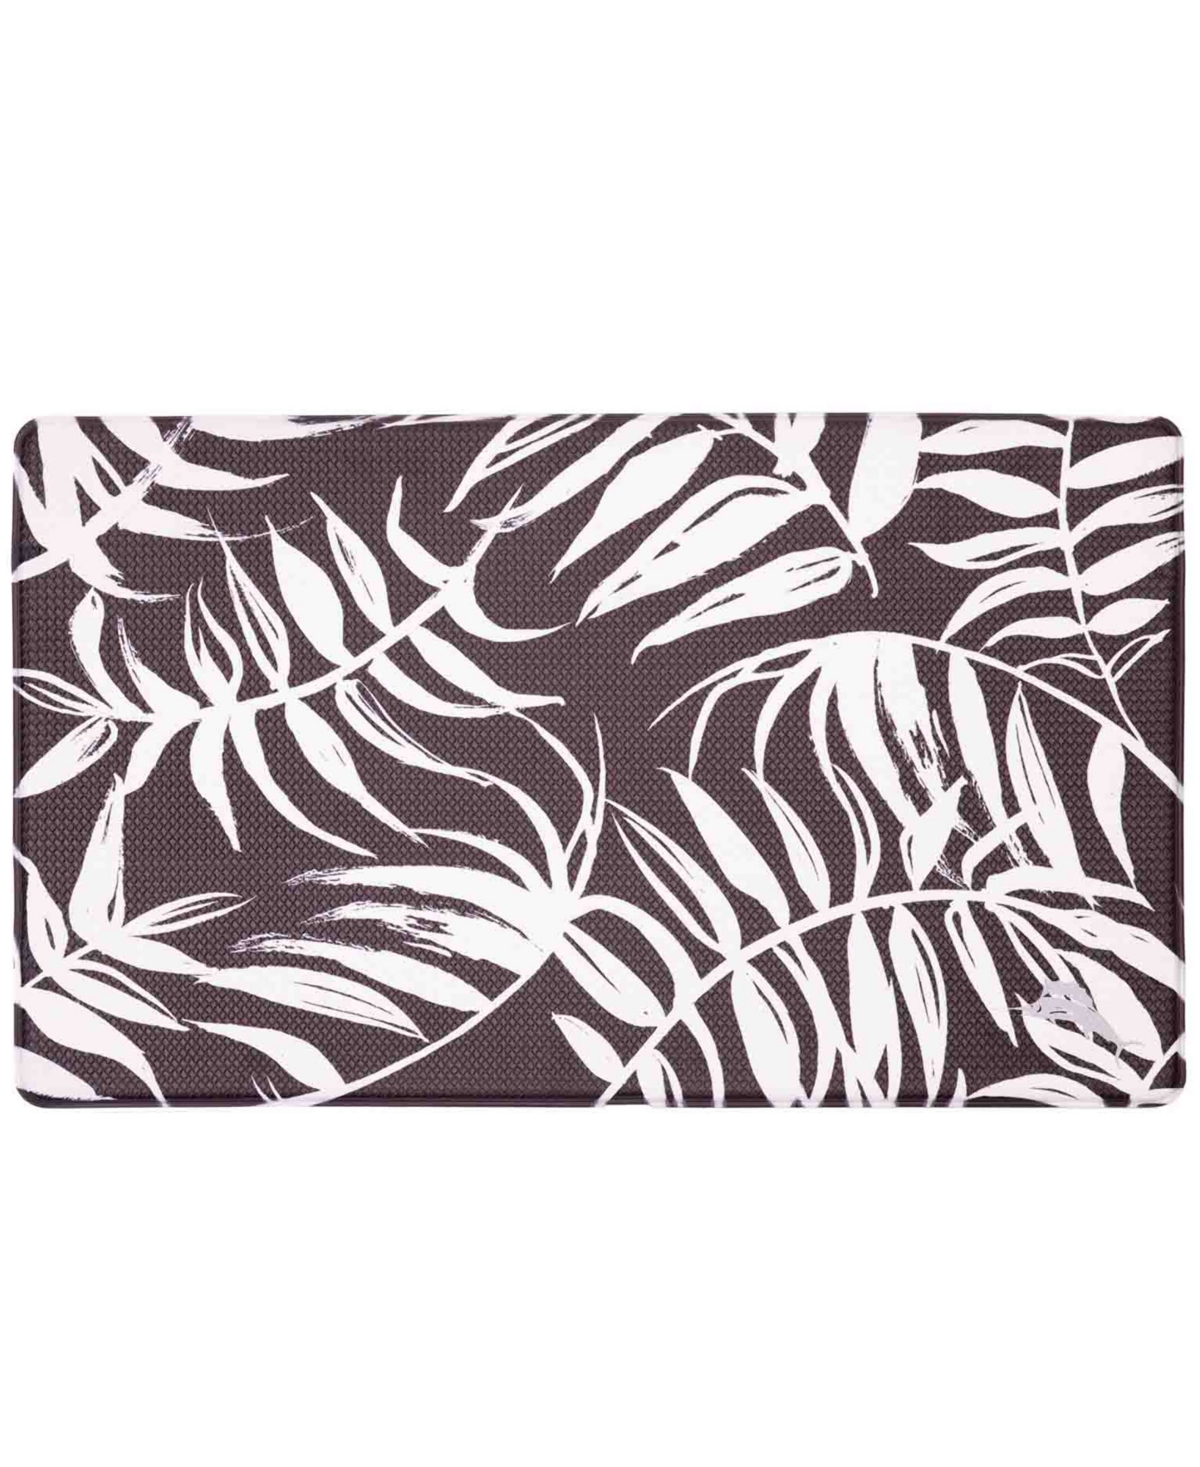 Tommy Bahama 18" X 30" Printed Polyvinyl Chloride Fatigue-resistant Mat In Midnight Leaves